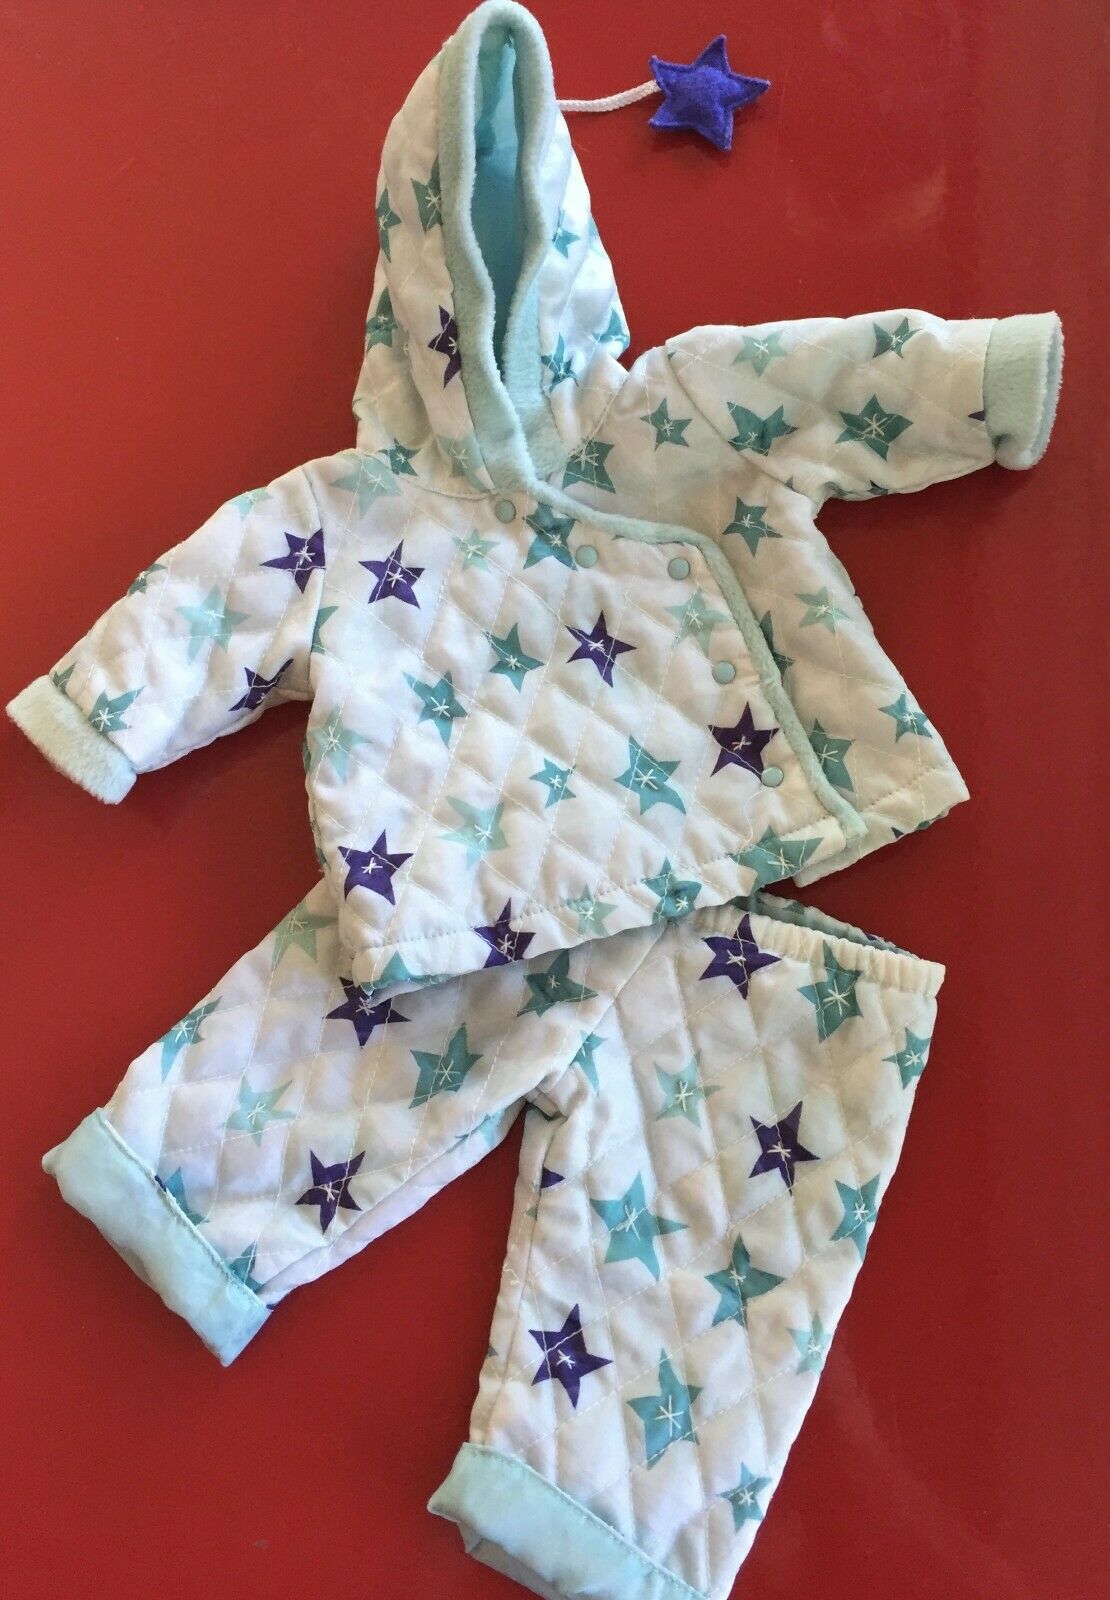 2008 American Girl Bitty Baby Boy Twin Blue Star Snowsuit Outfit "snowy Day"